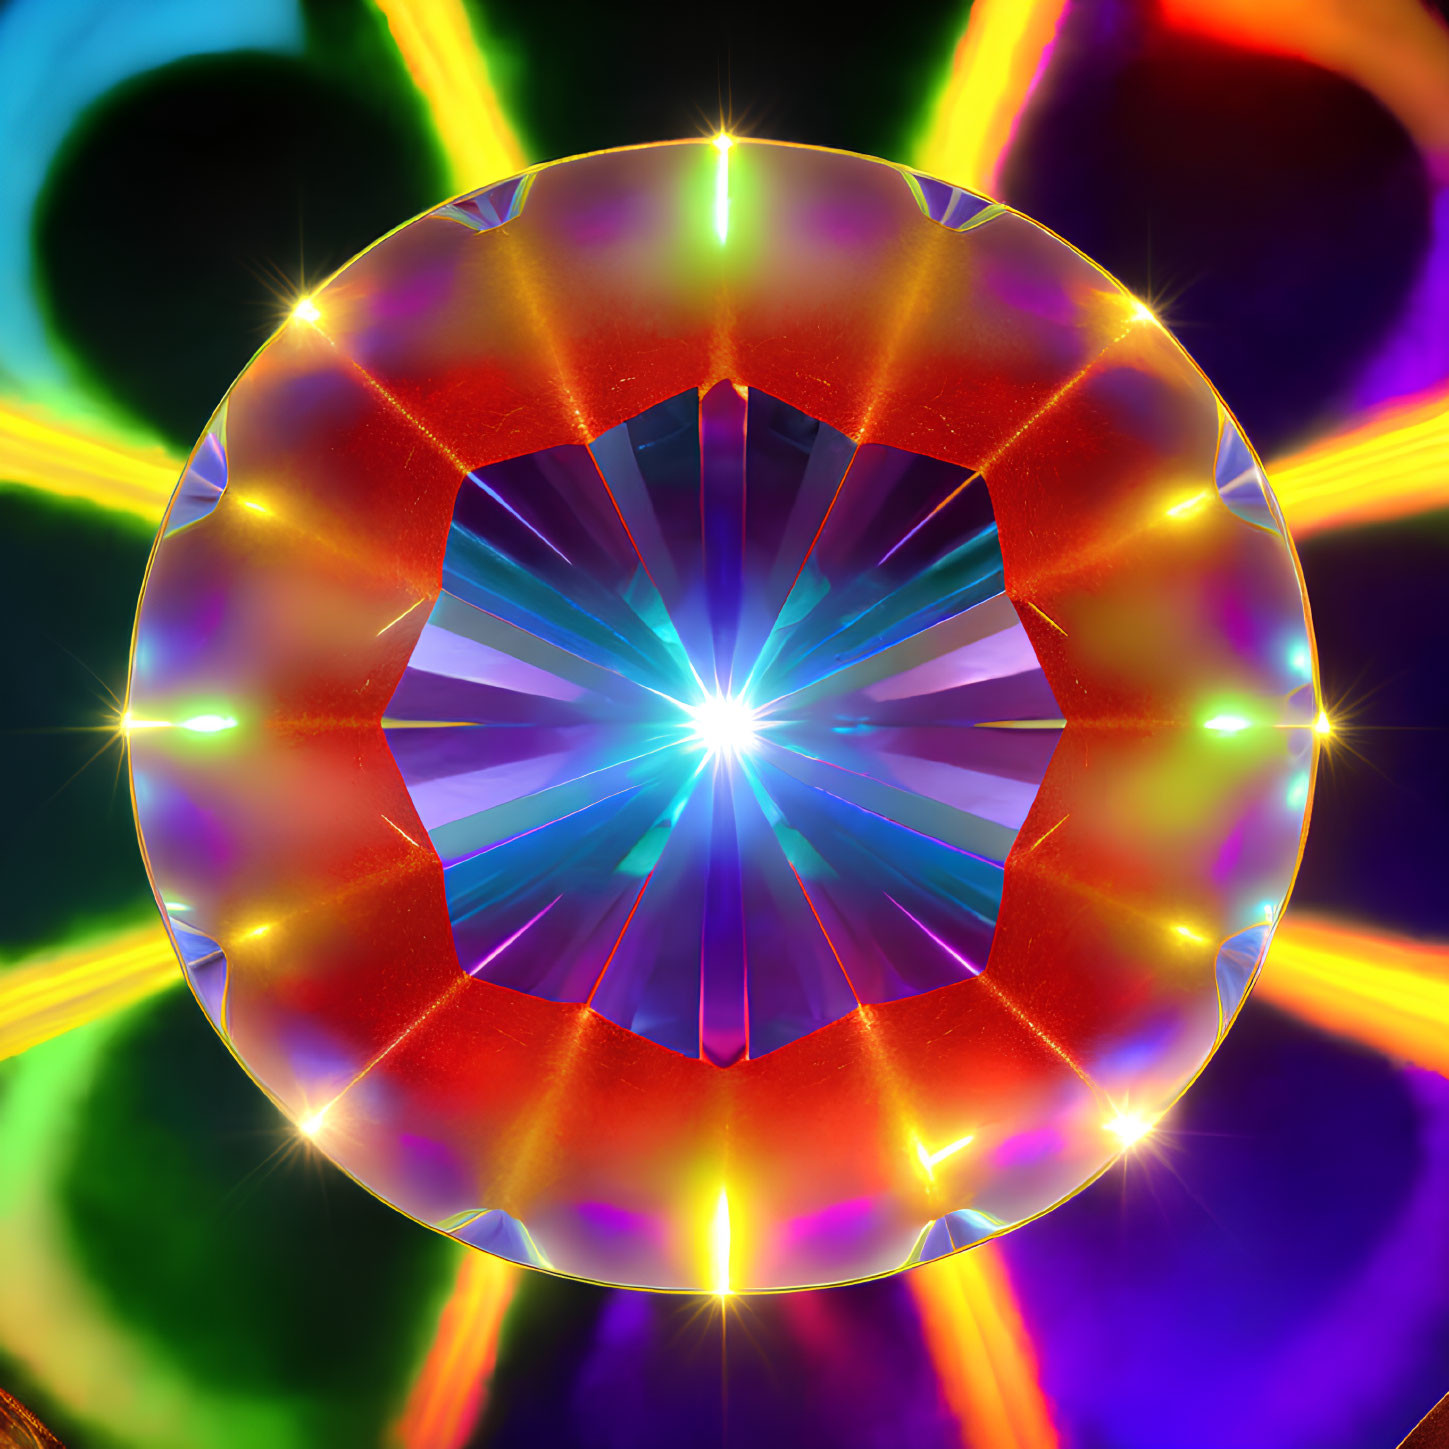 Colorful Abstract Artwork with Starburst Center and Prismatic Ring